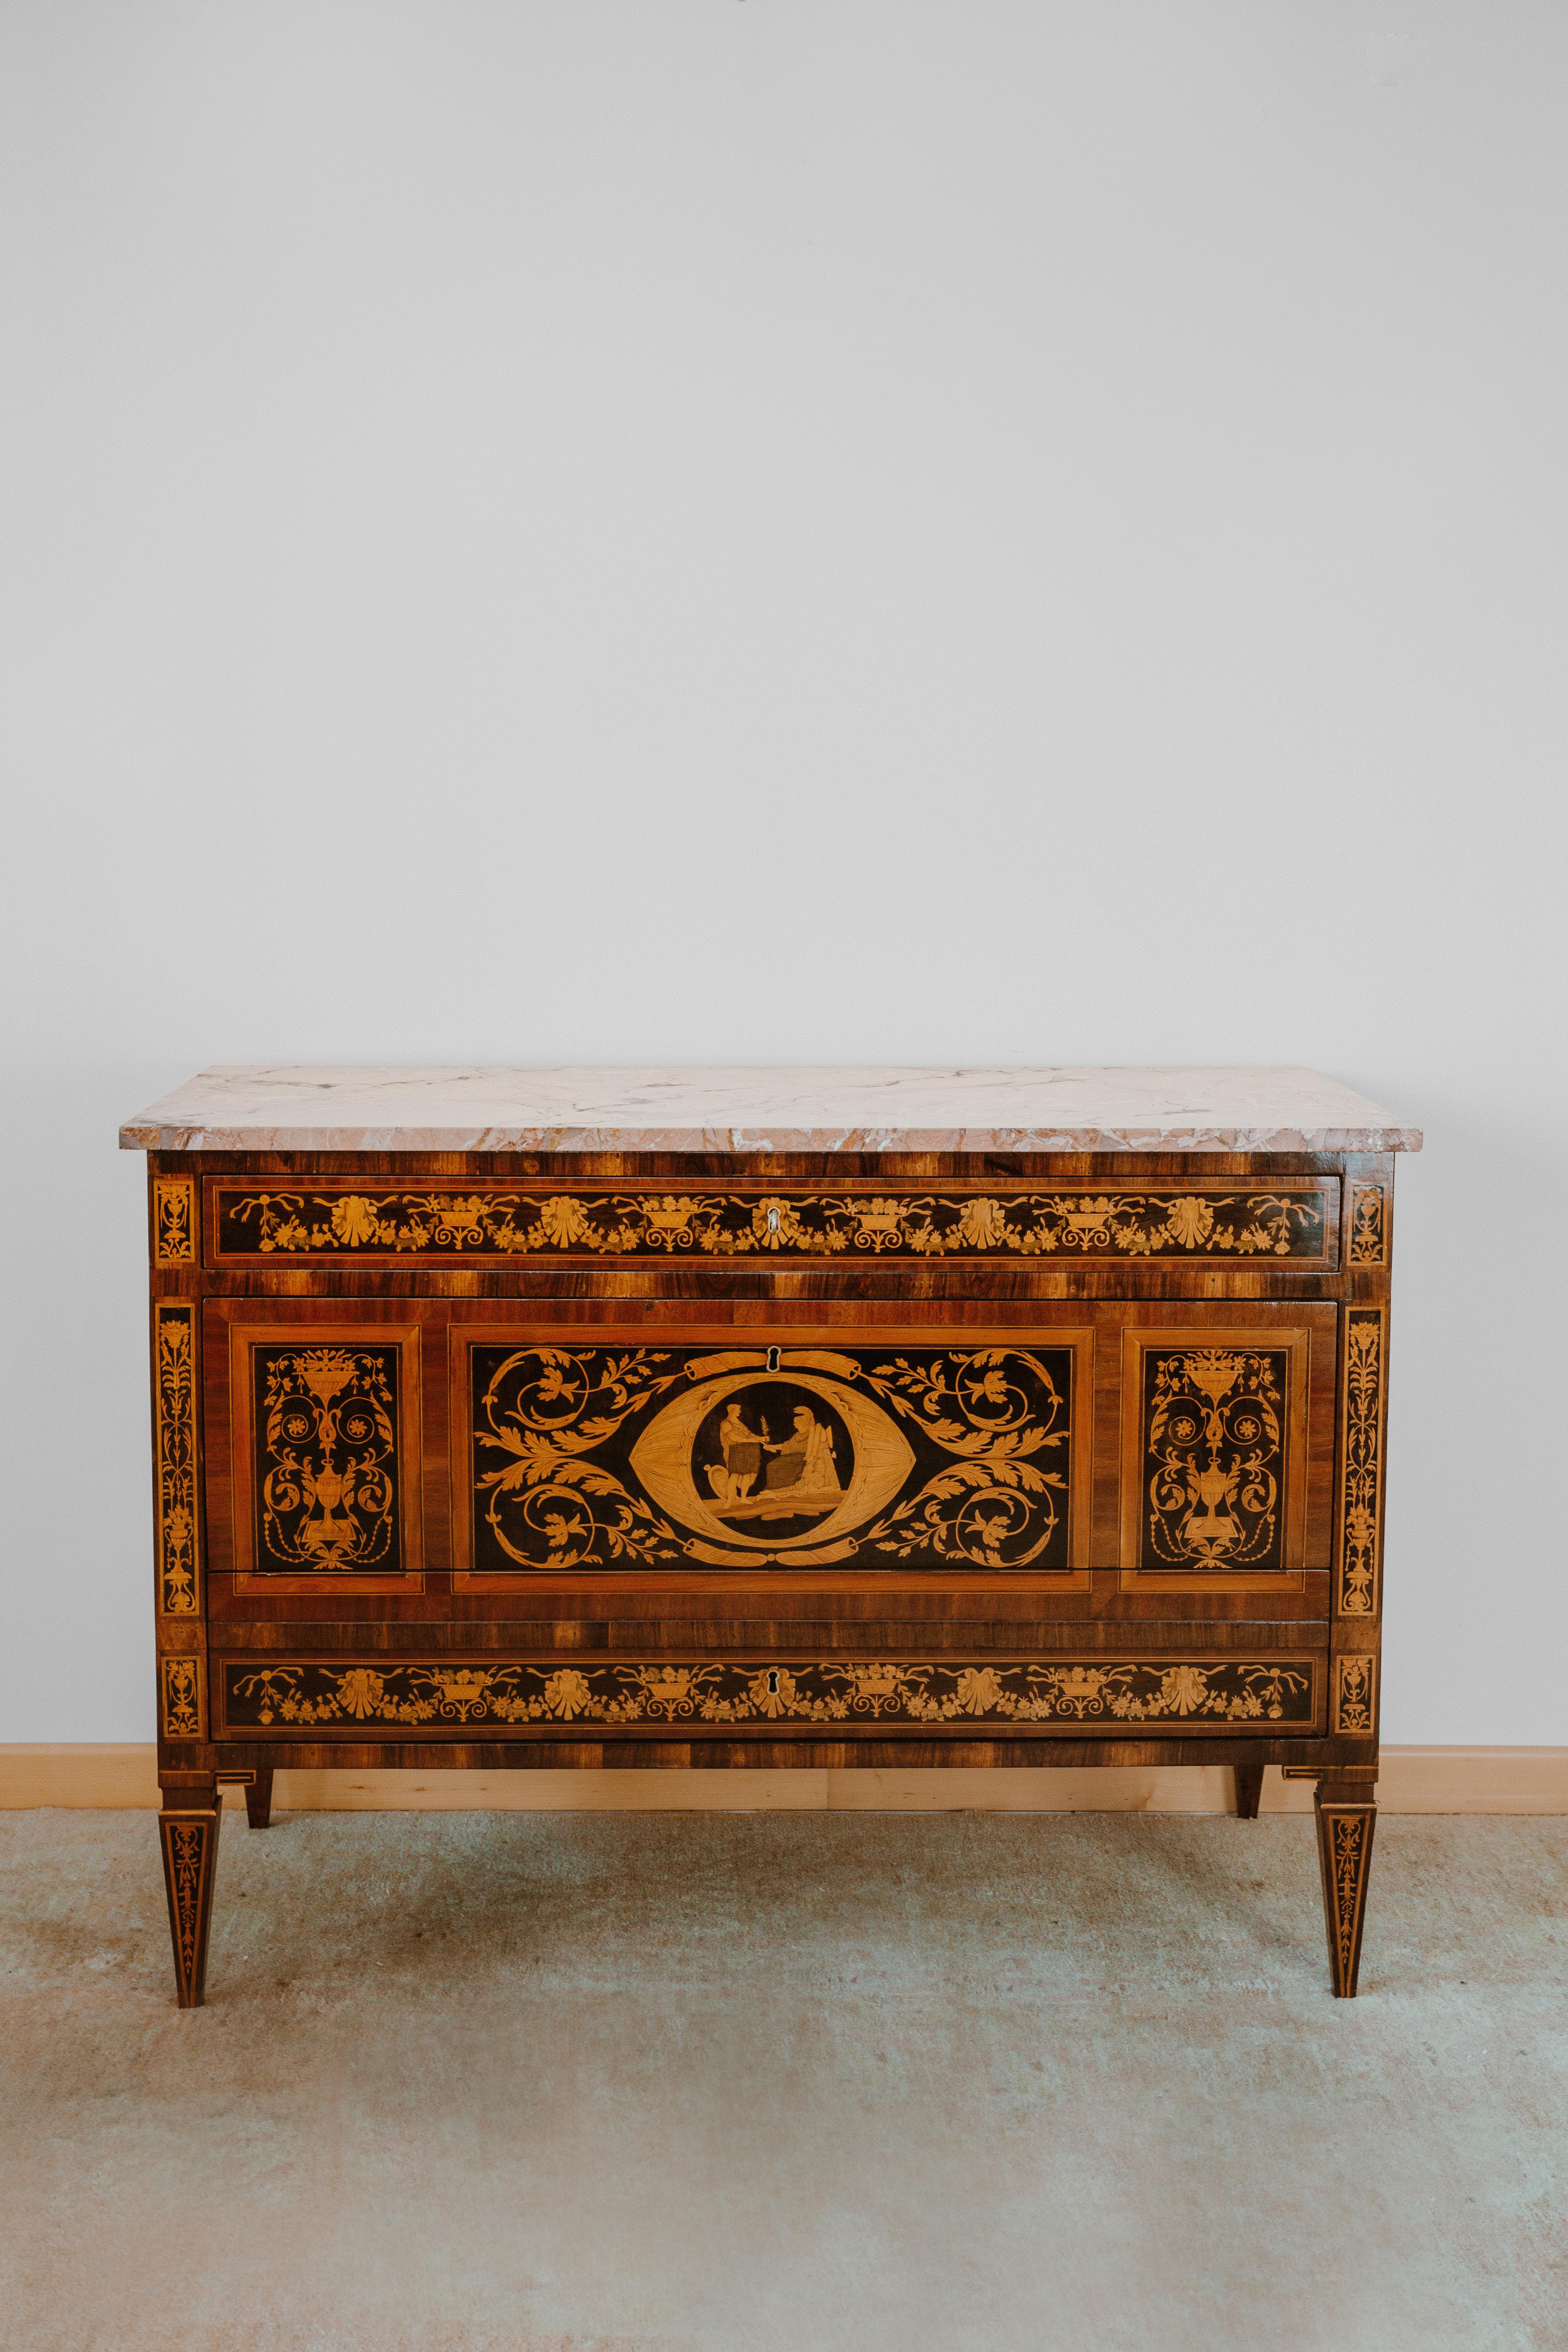 Neoclassical Pair of neoclassical Italian chests of drawers in inlaid wood, XVIII century For Sale